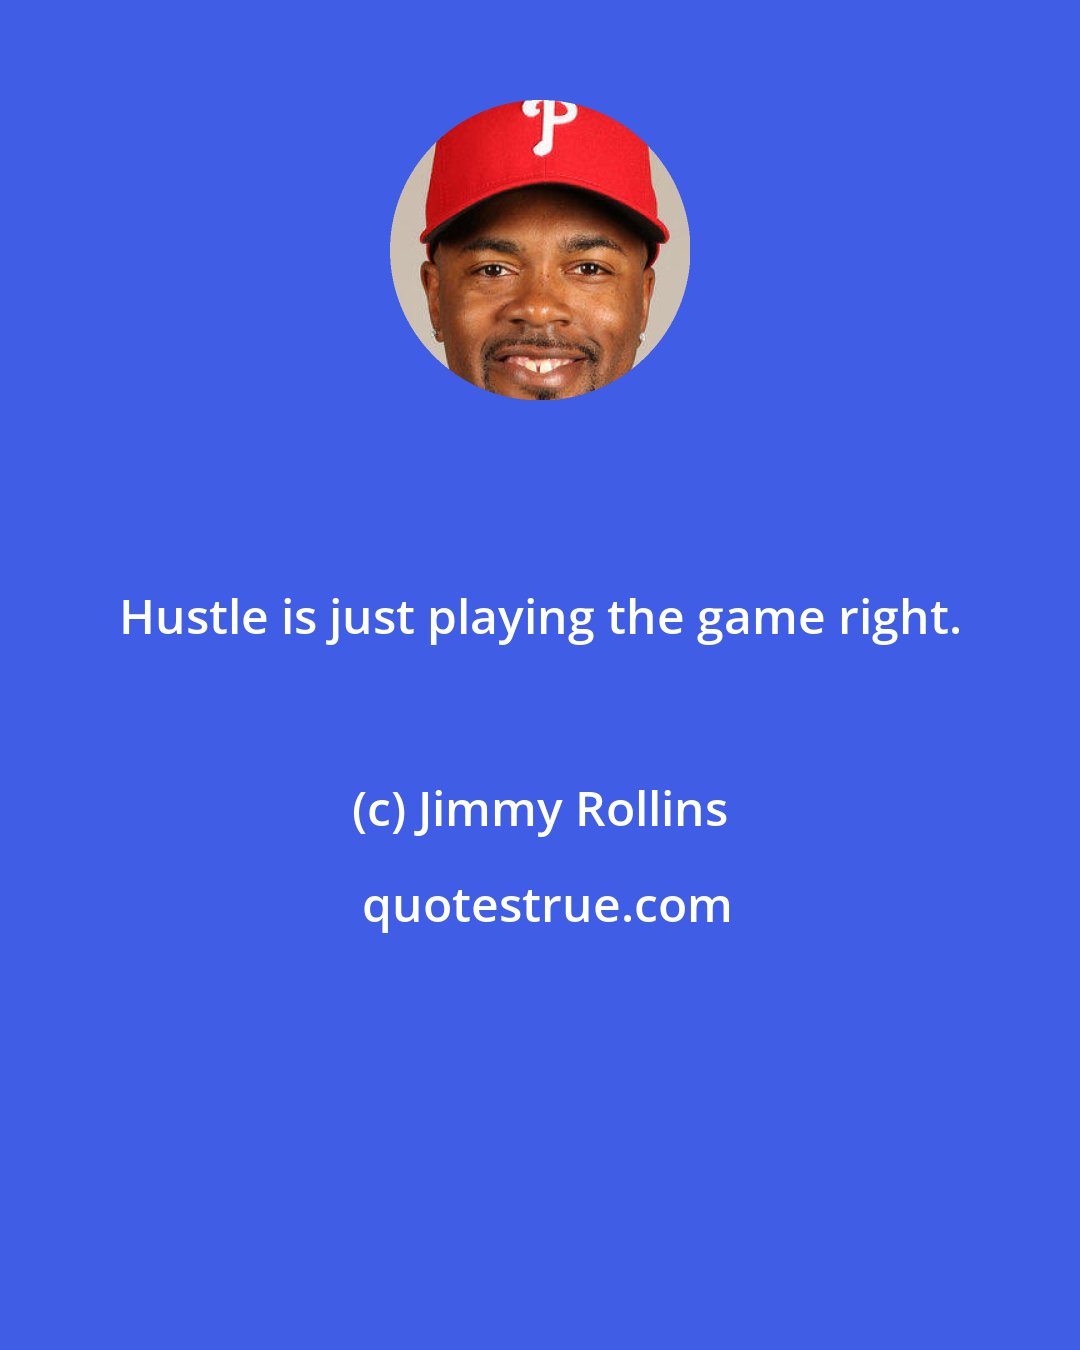 Jimmy Rollins: Hustle is just playing the game right.